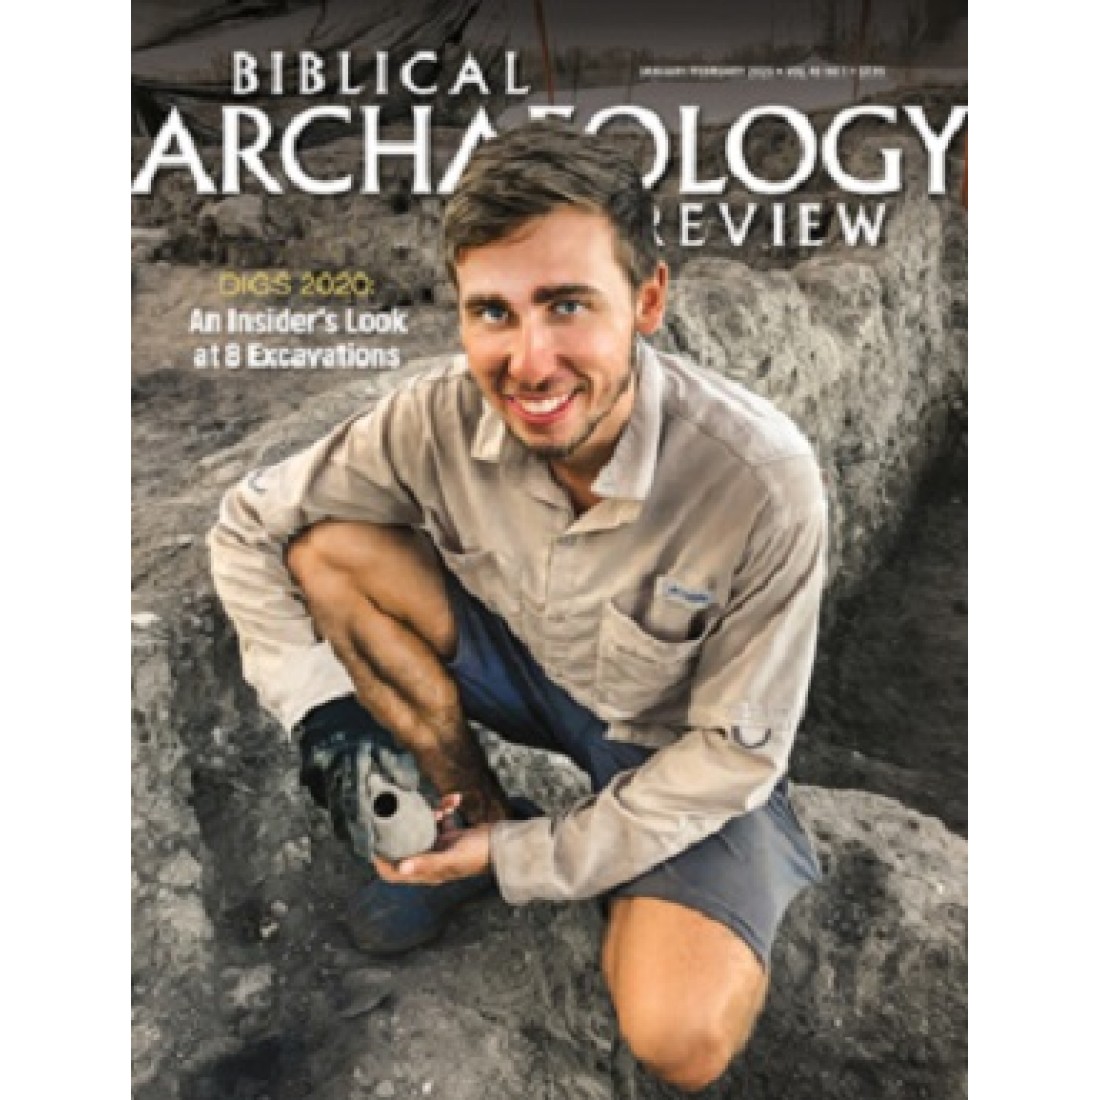 Biblical Archaeology Review Magazine Subscriber Services